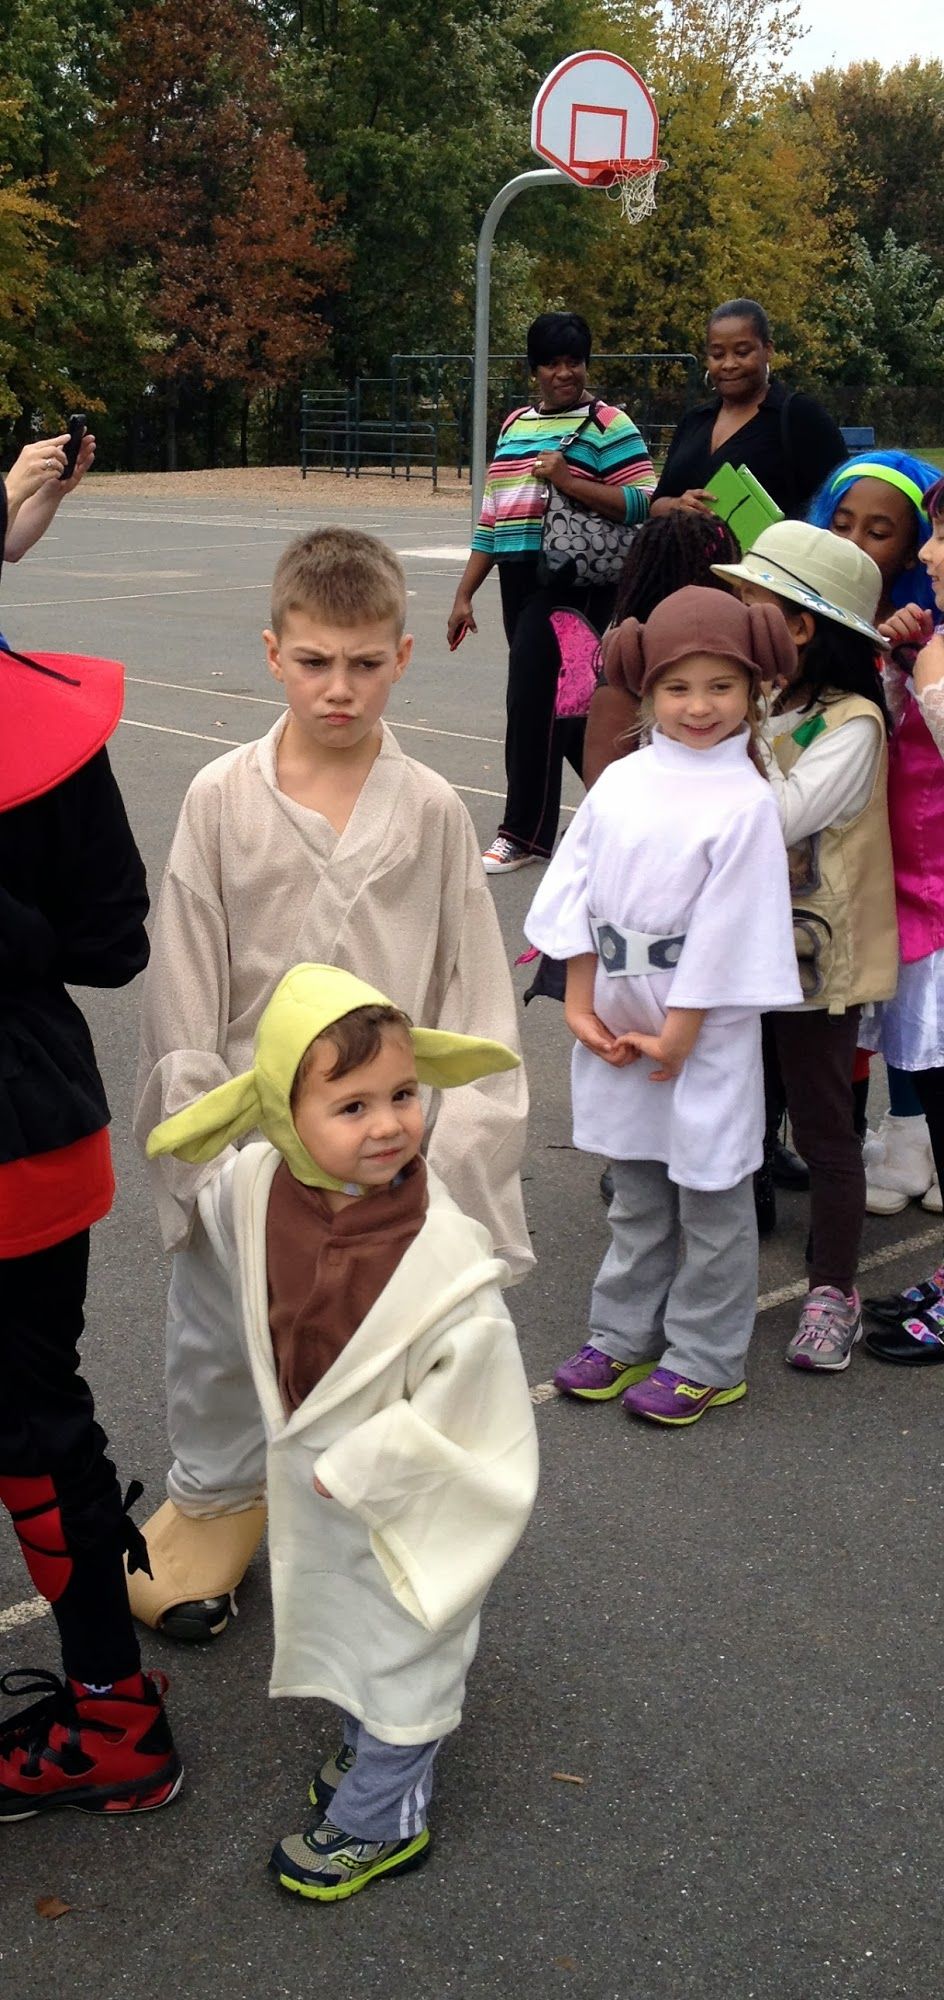  A Grumpy Luke with an oblivious Yoda and Princess Leia.Fortunately, he lightened up once the party started :) 